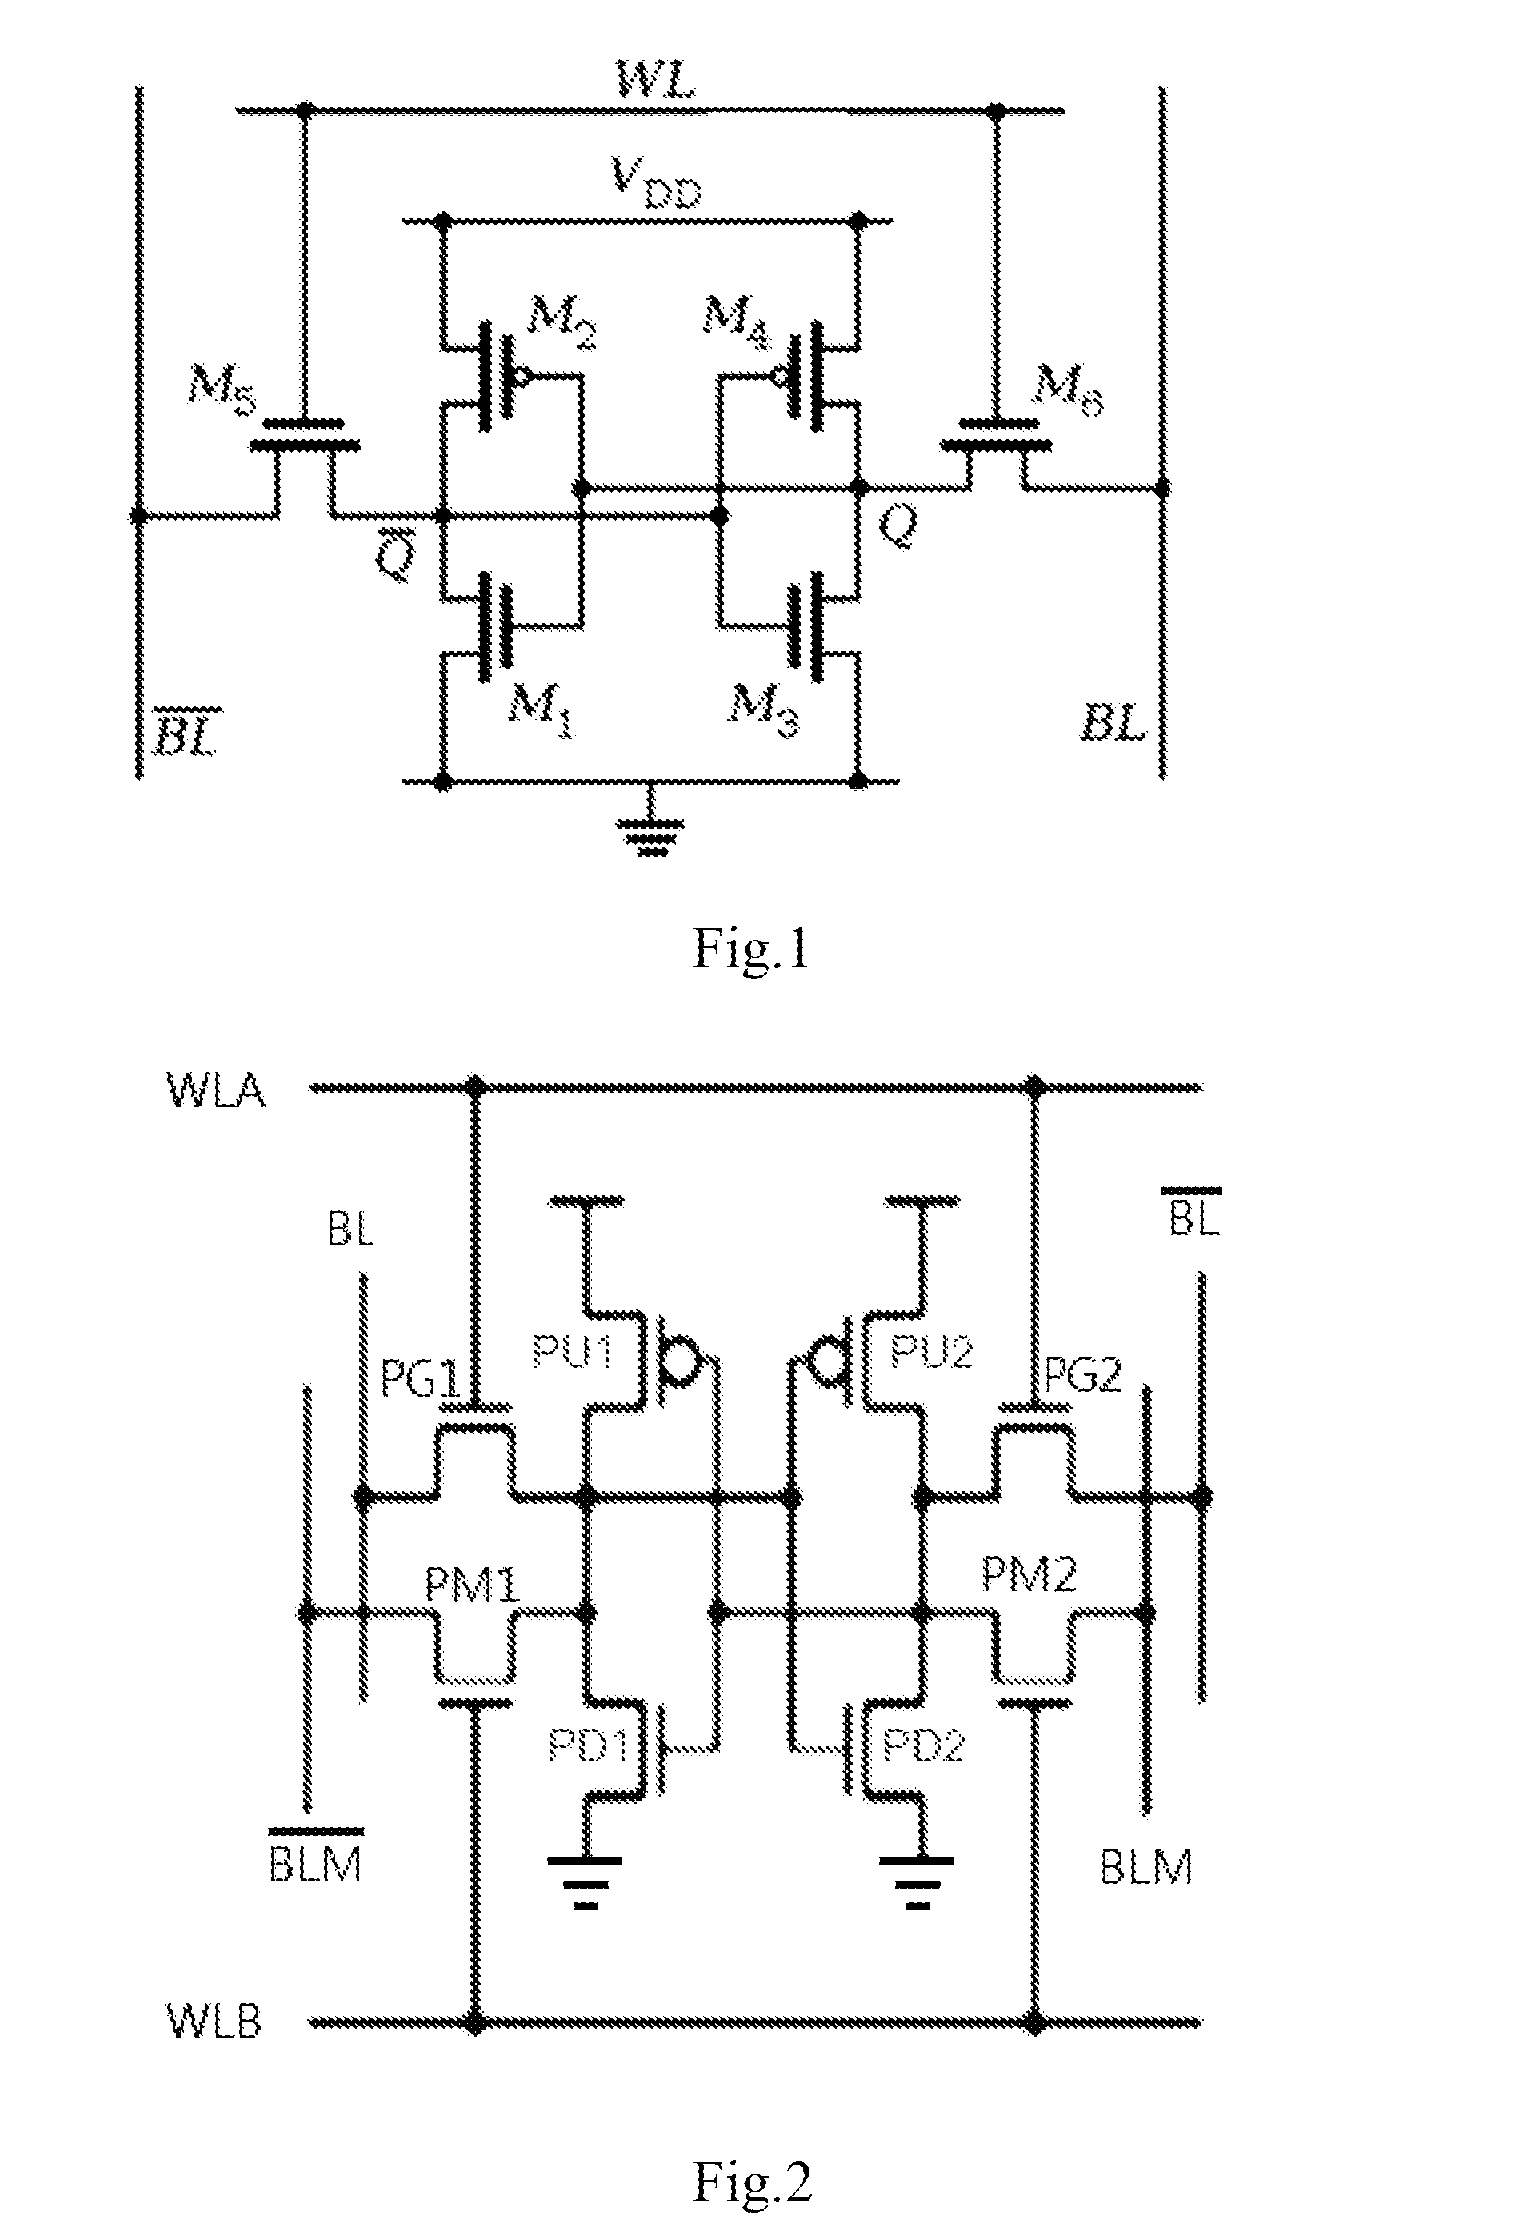 Method of detecting transistors mismatch in a SRAM cell